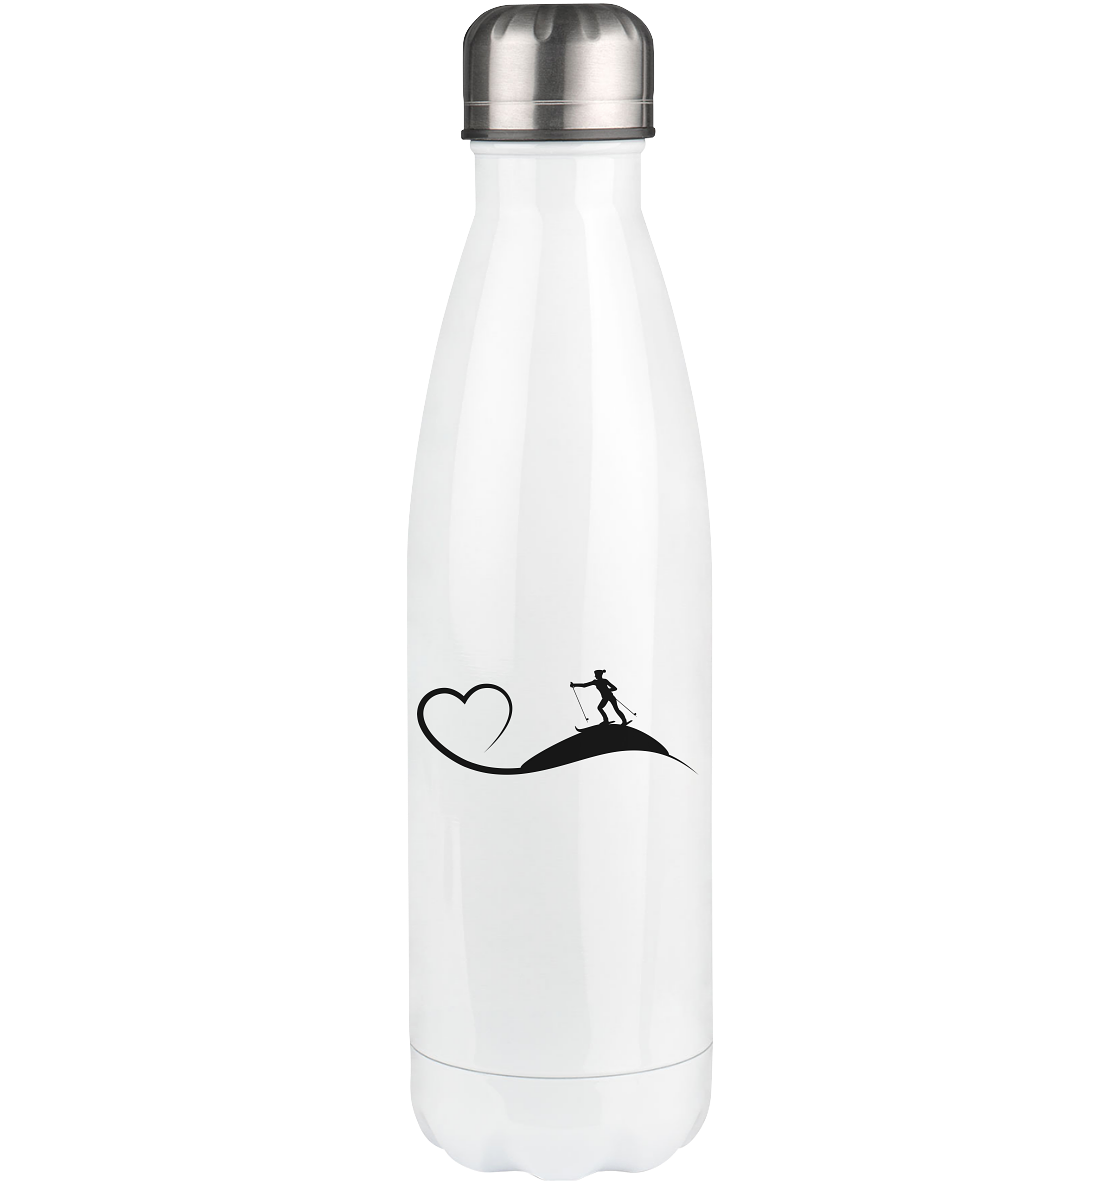 Heart and Skiing - Edelstahl Thermosflasche klettern ski 500ml